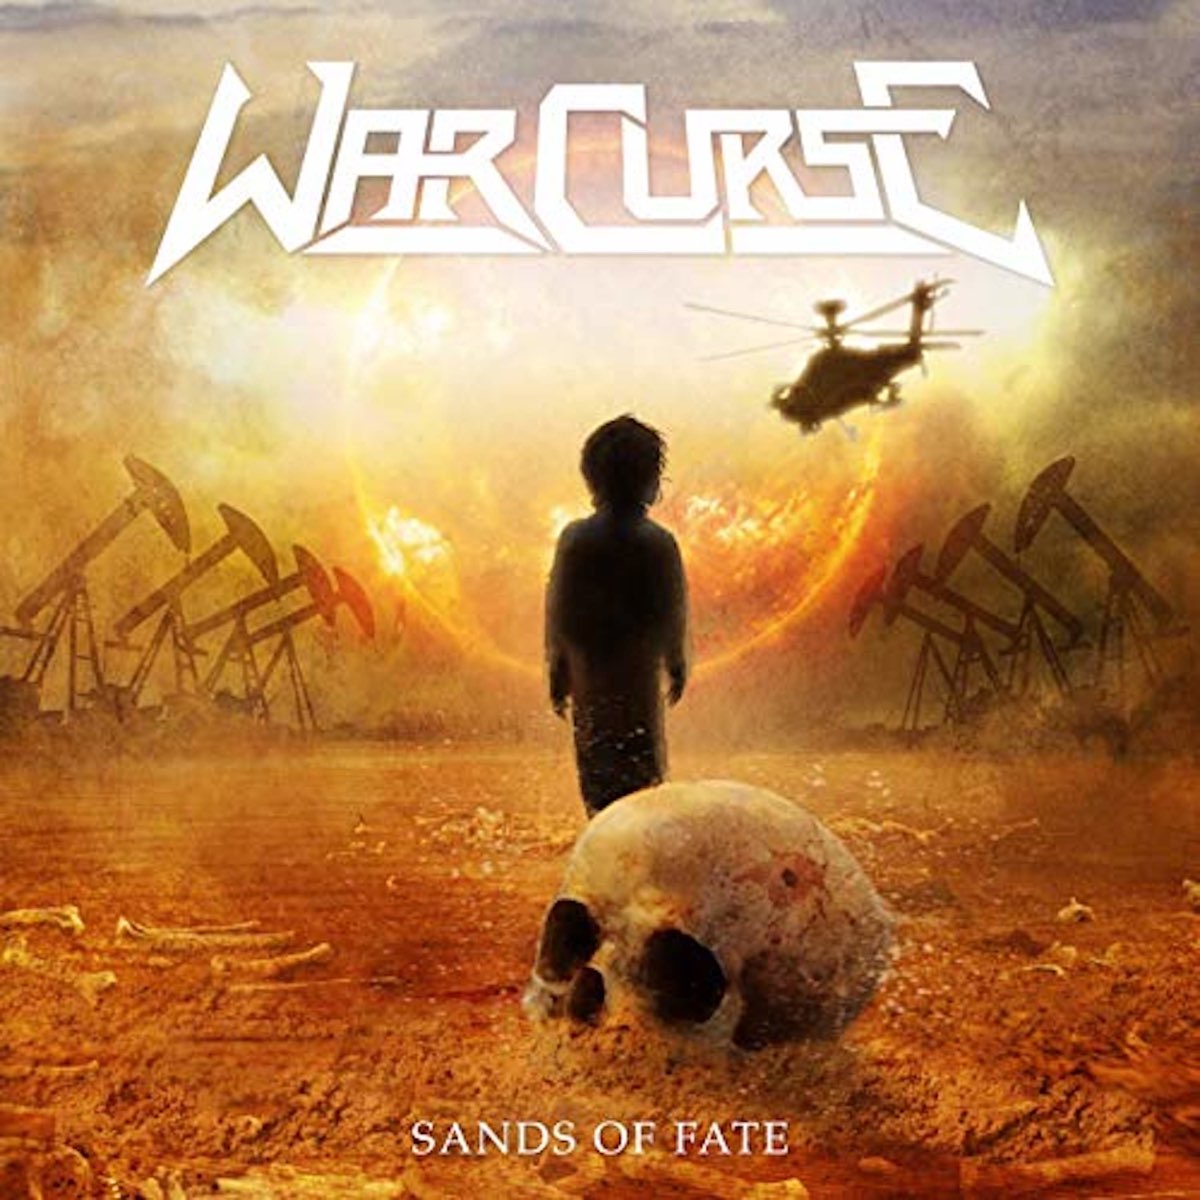 Sand of Fate - Single by War Curse on Apple Music